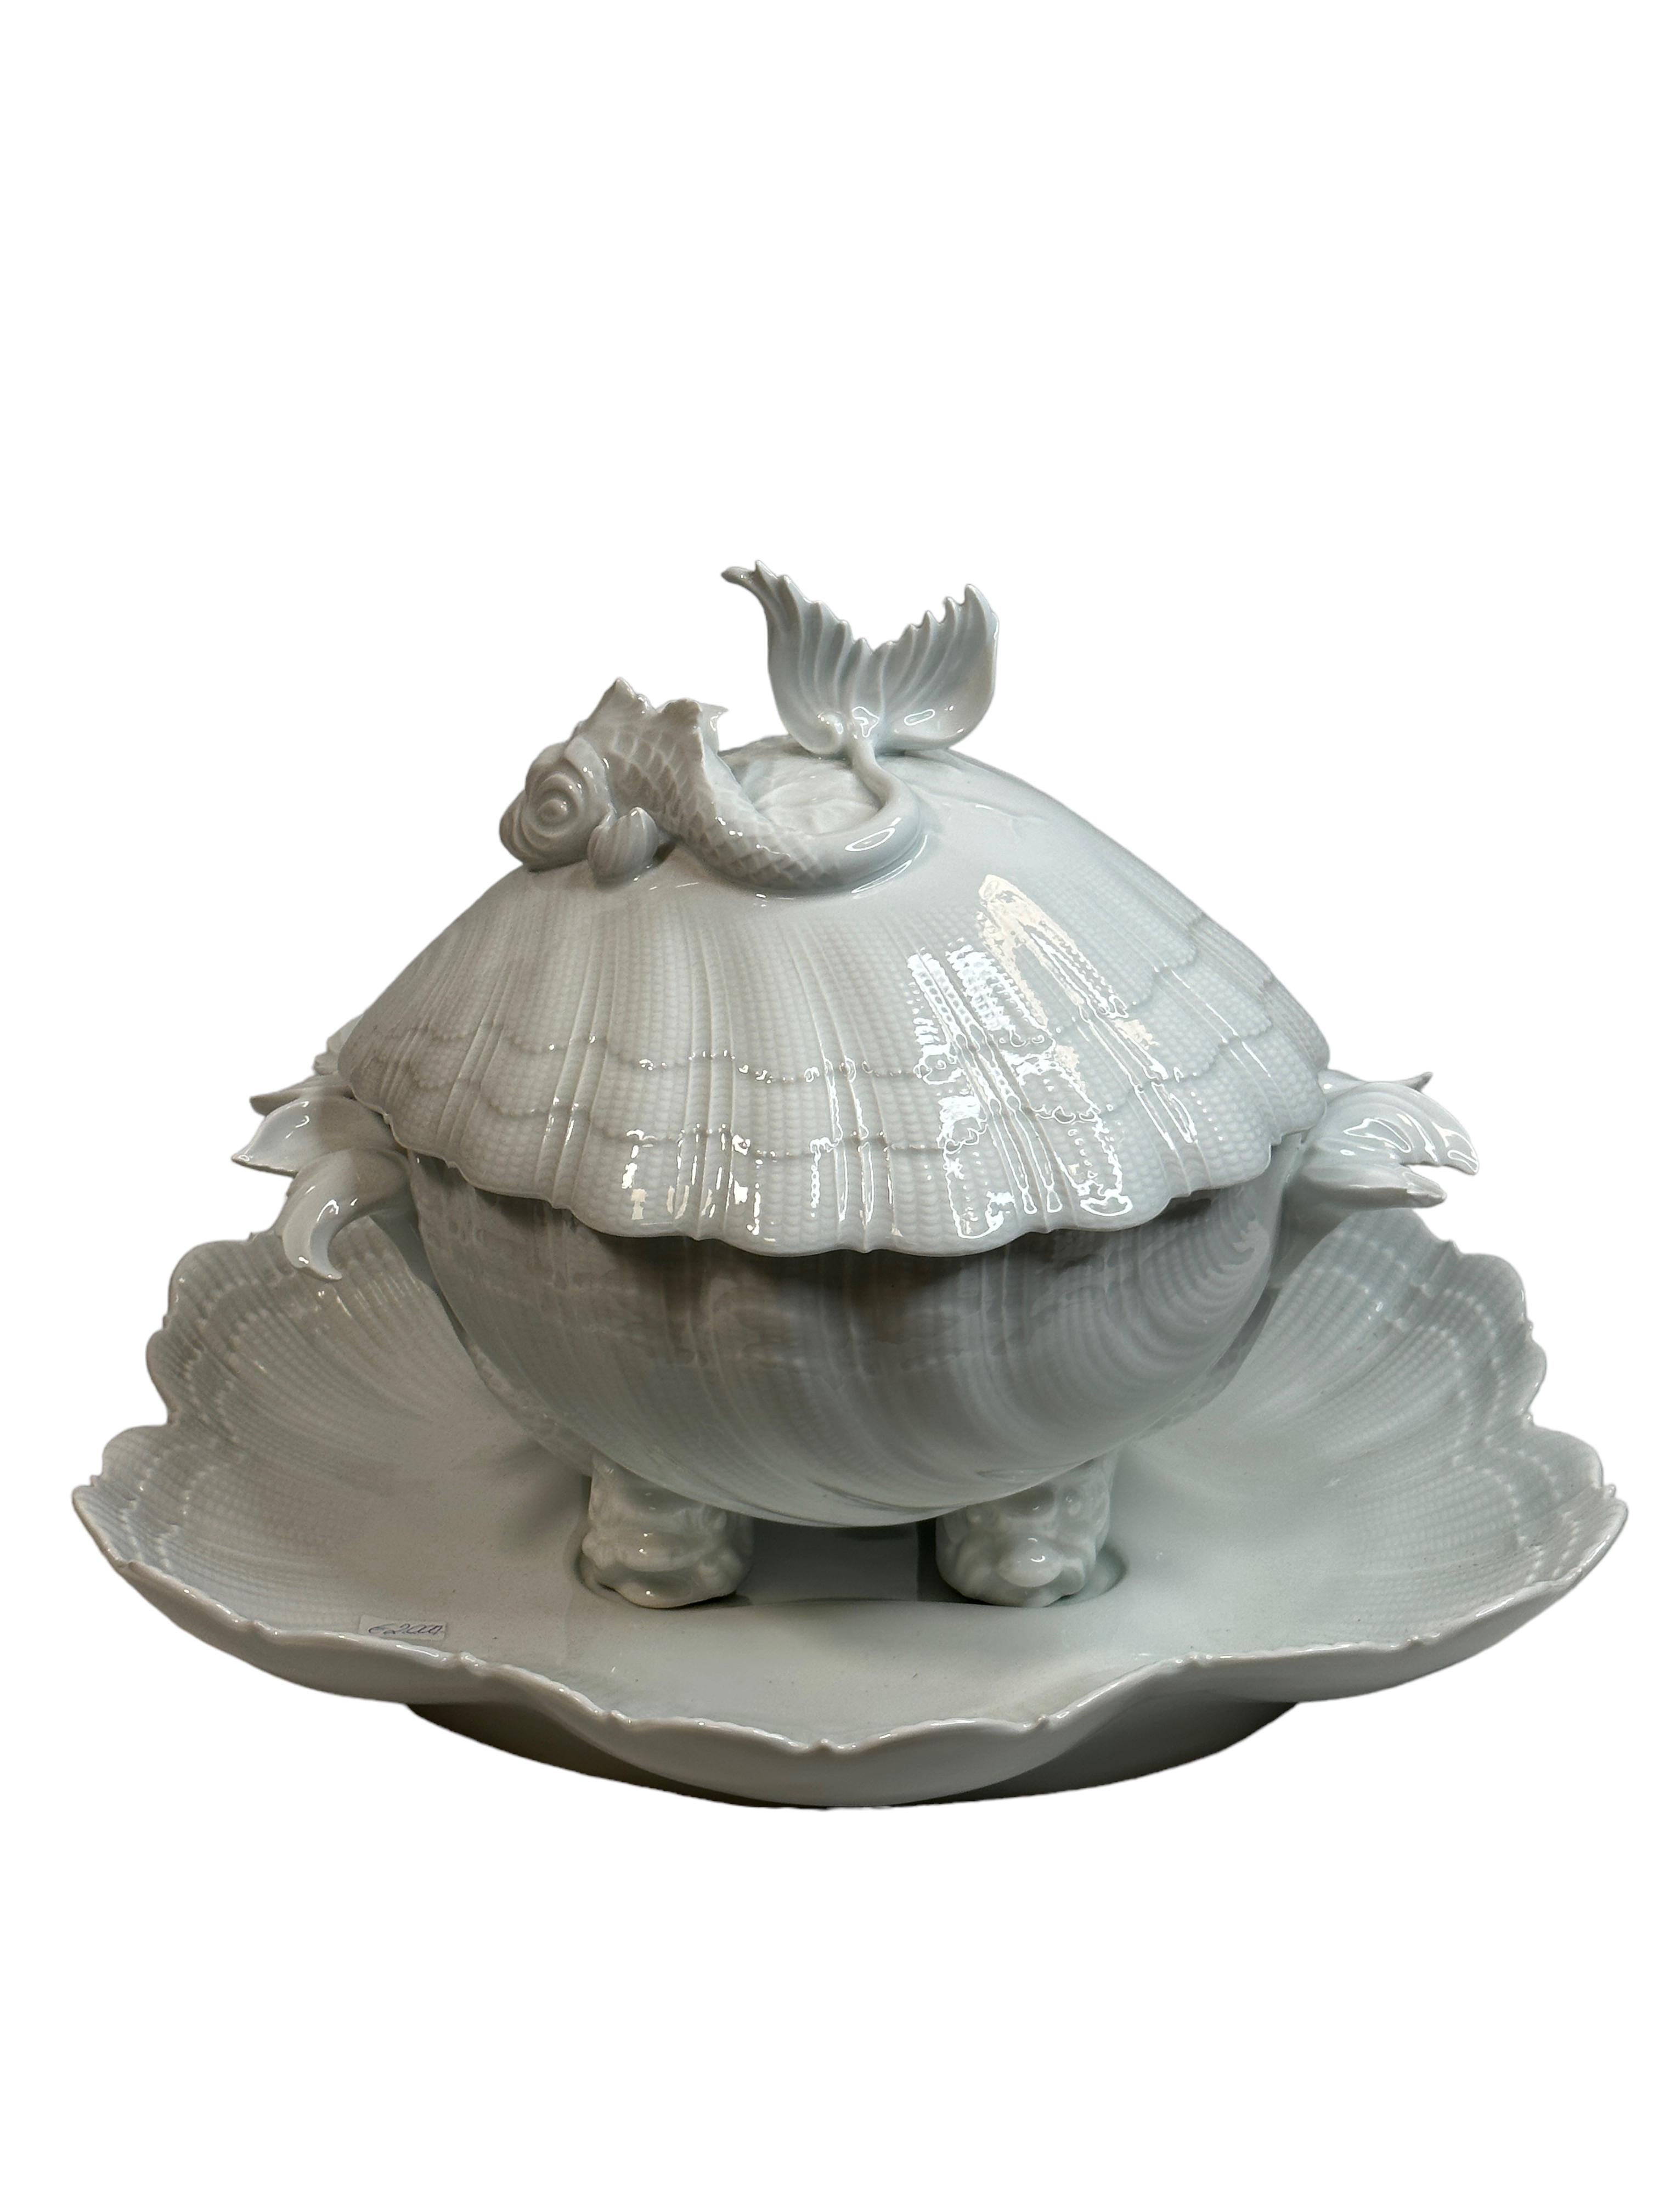 Louis XV Exceptional Shell Shaped Limoges China Porcelain Soup Tureen with Dolphin Decor For Sale